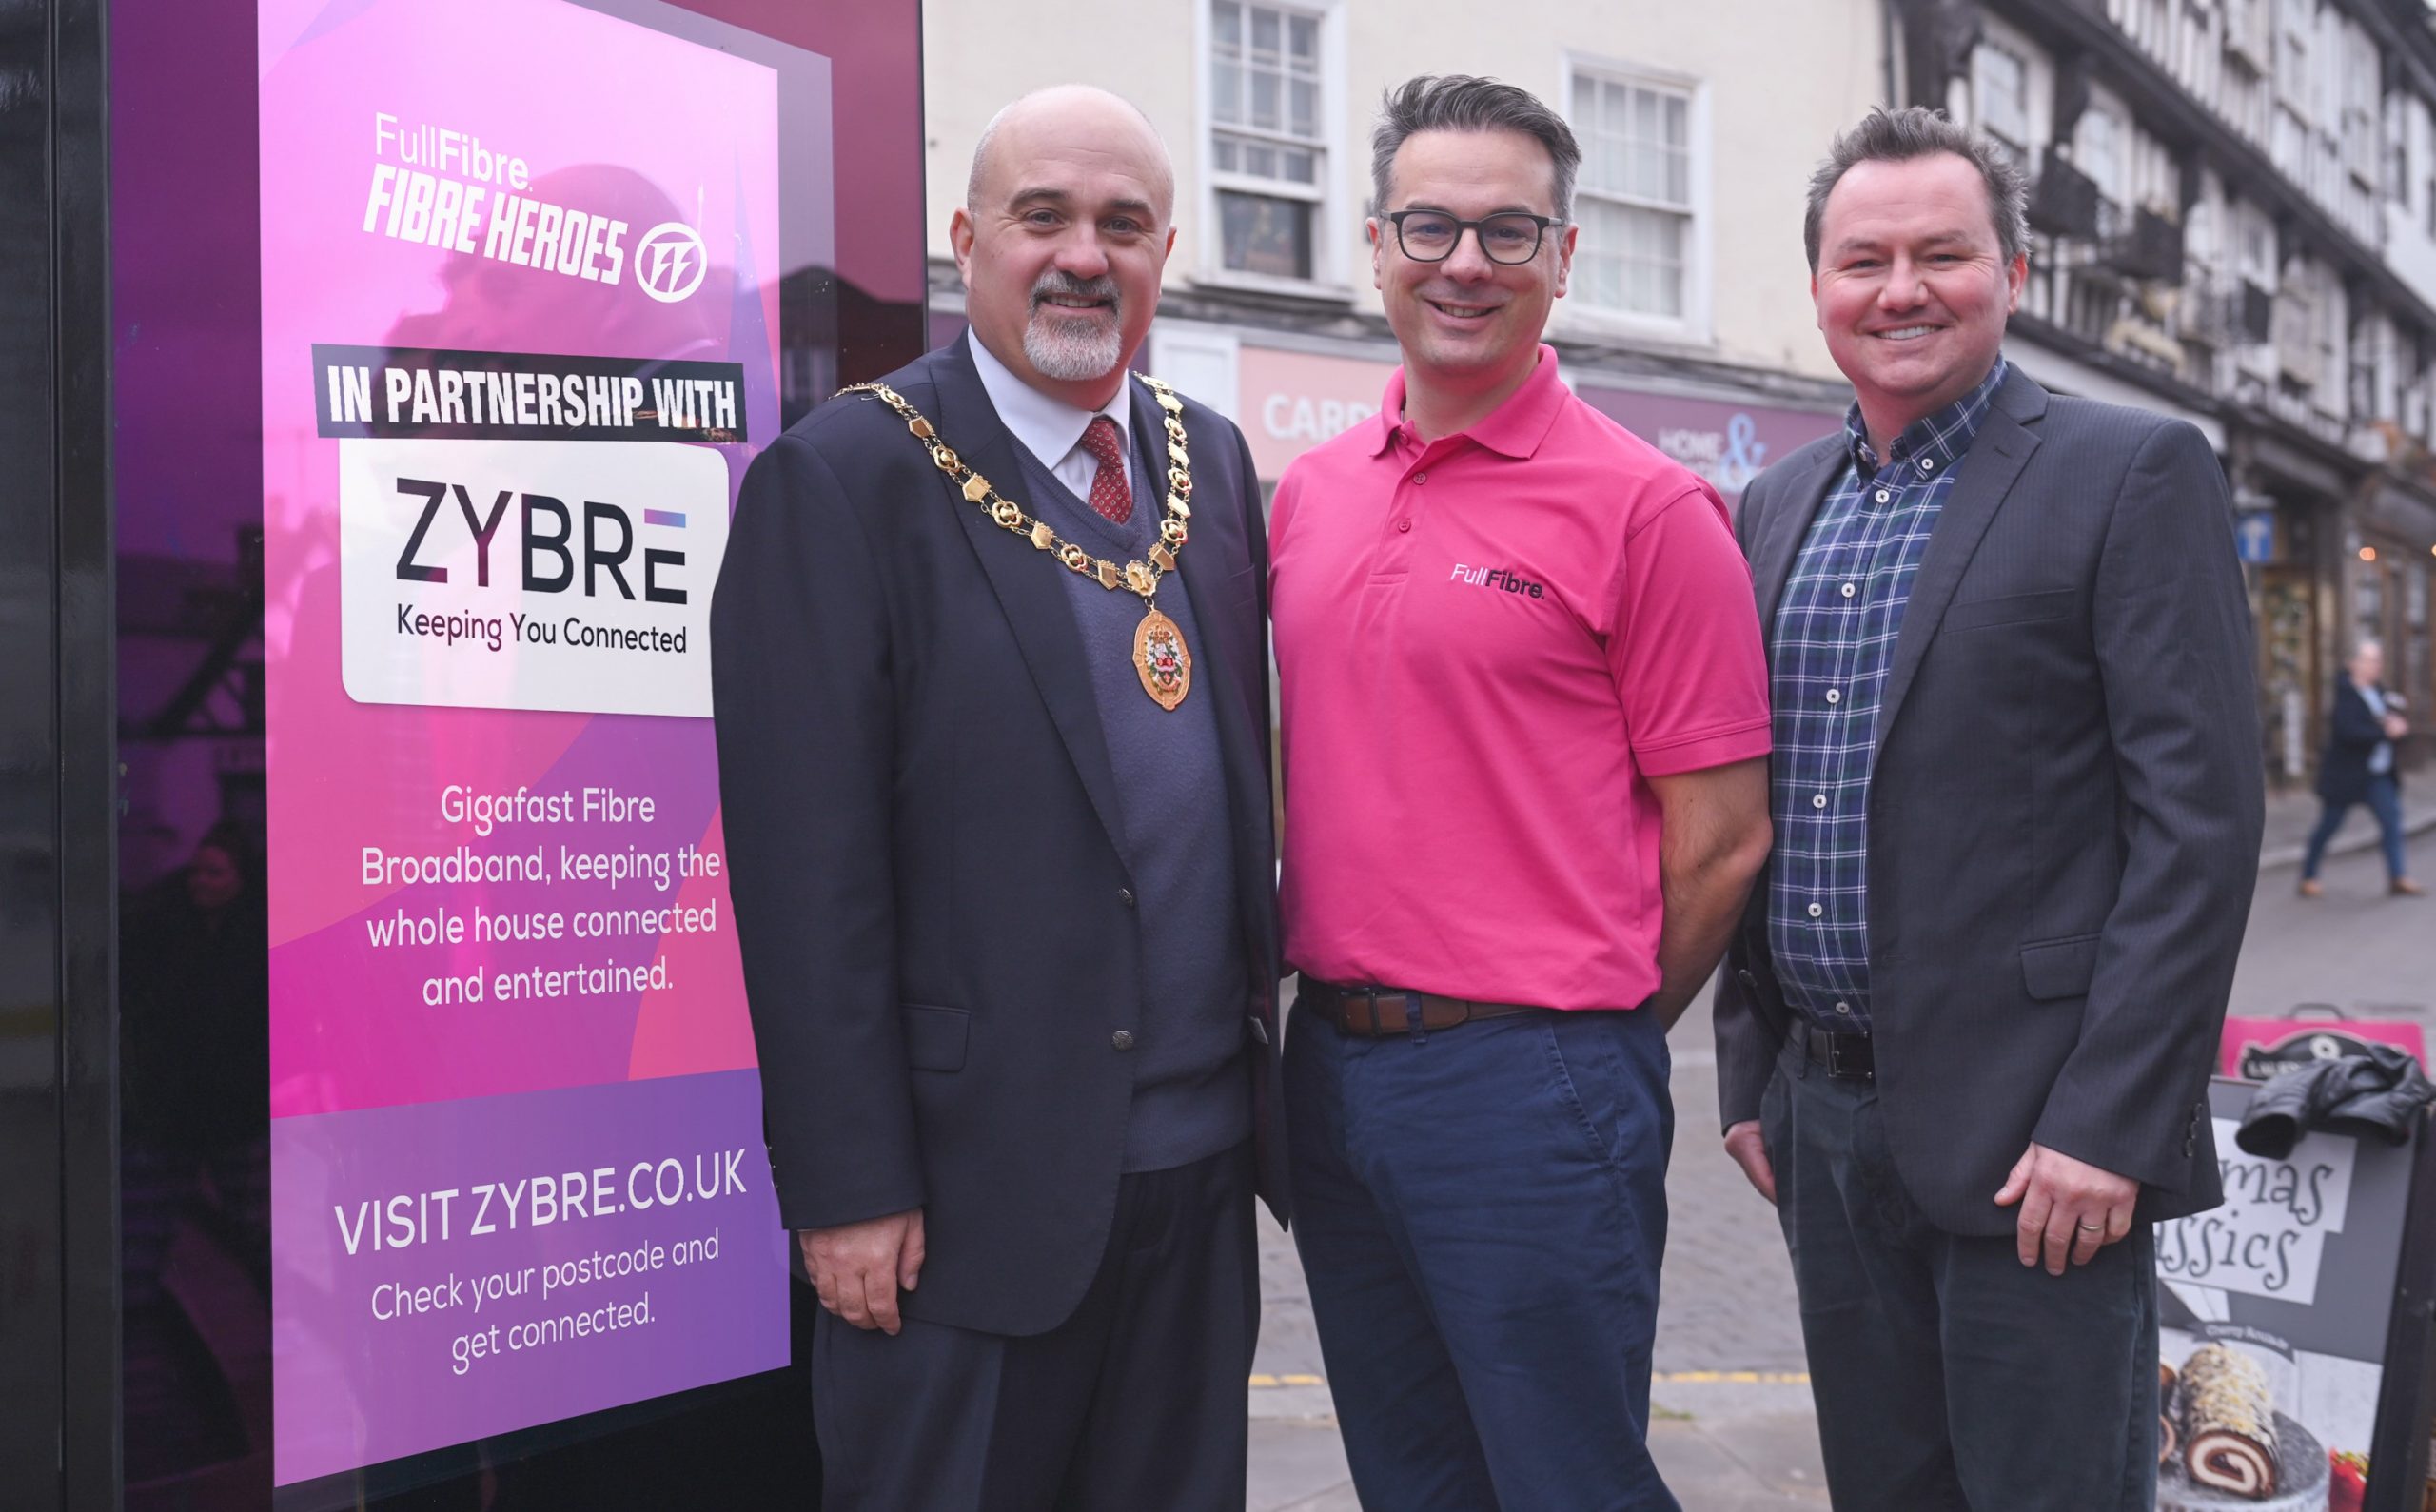 Mayor and Full Fibre at new Digital Tourist Information point